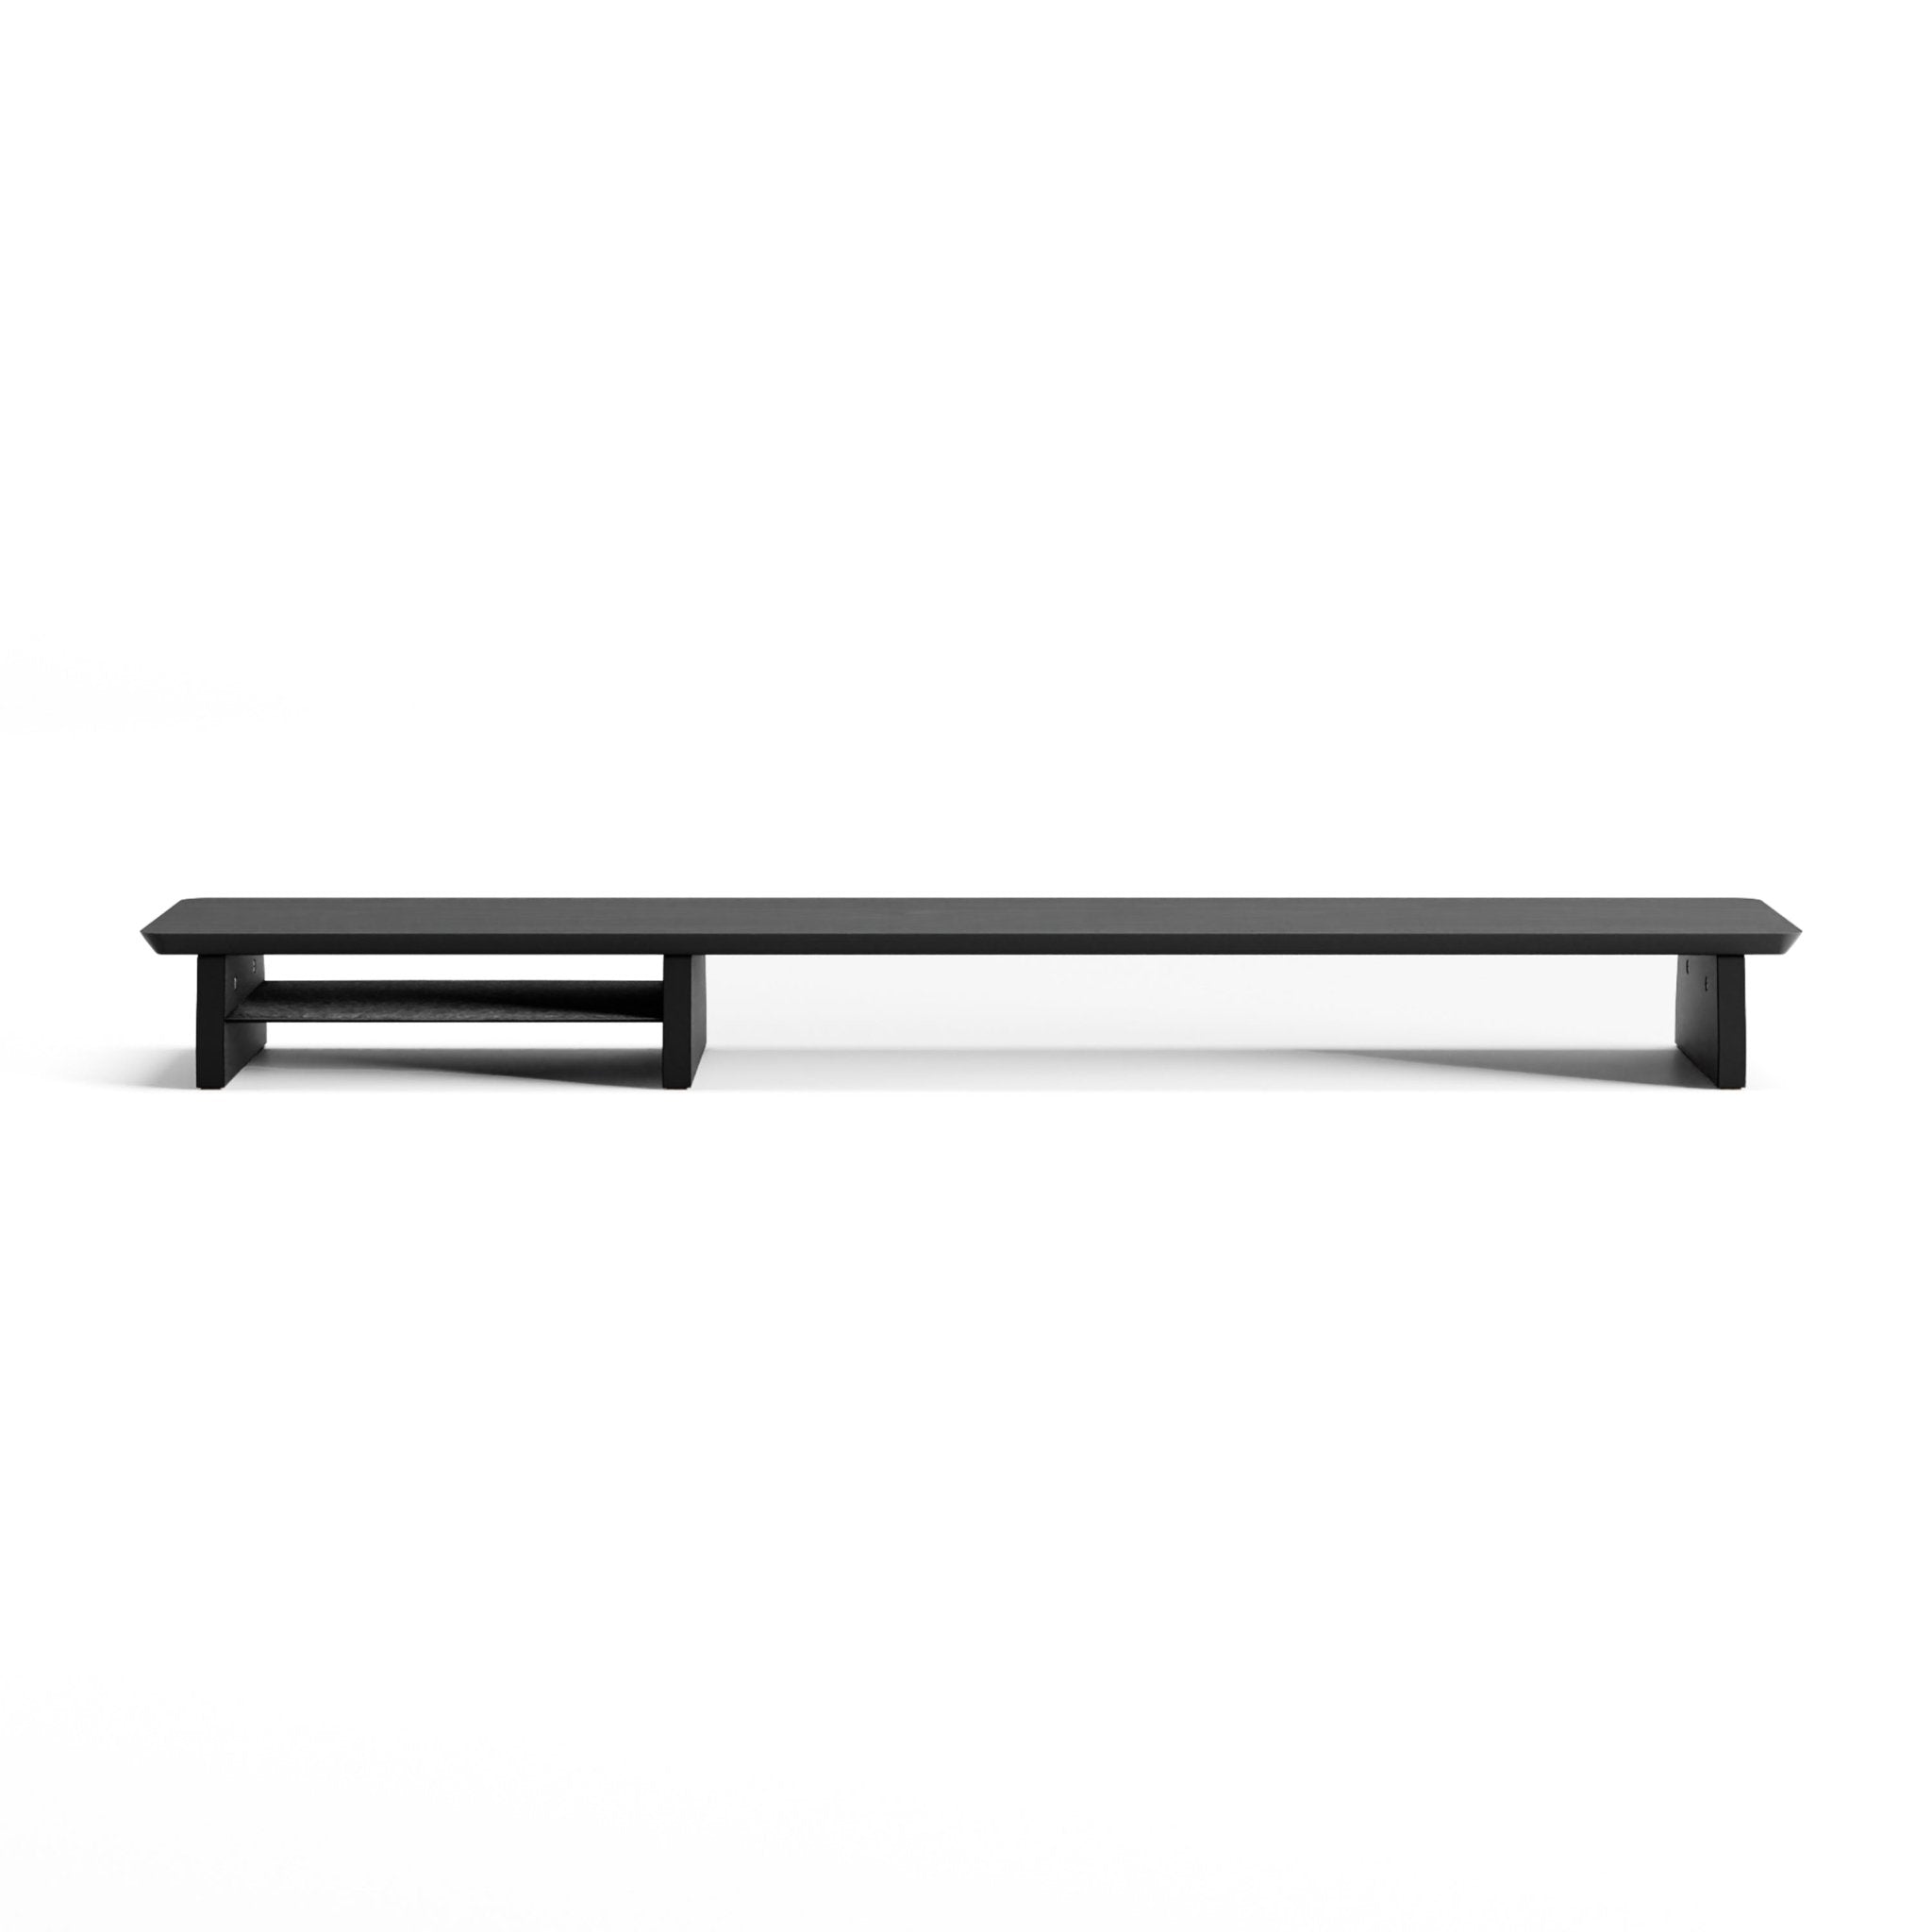 Upgrade your workspace with raico desk shelf for monitor stand in black. Design inspired by Grovemade, this monitor stand provides extra storage and organization for your desk while also elevating your screen to a more ergonomic height.